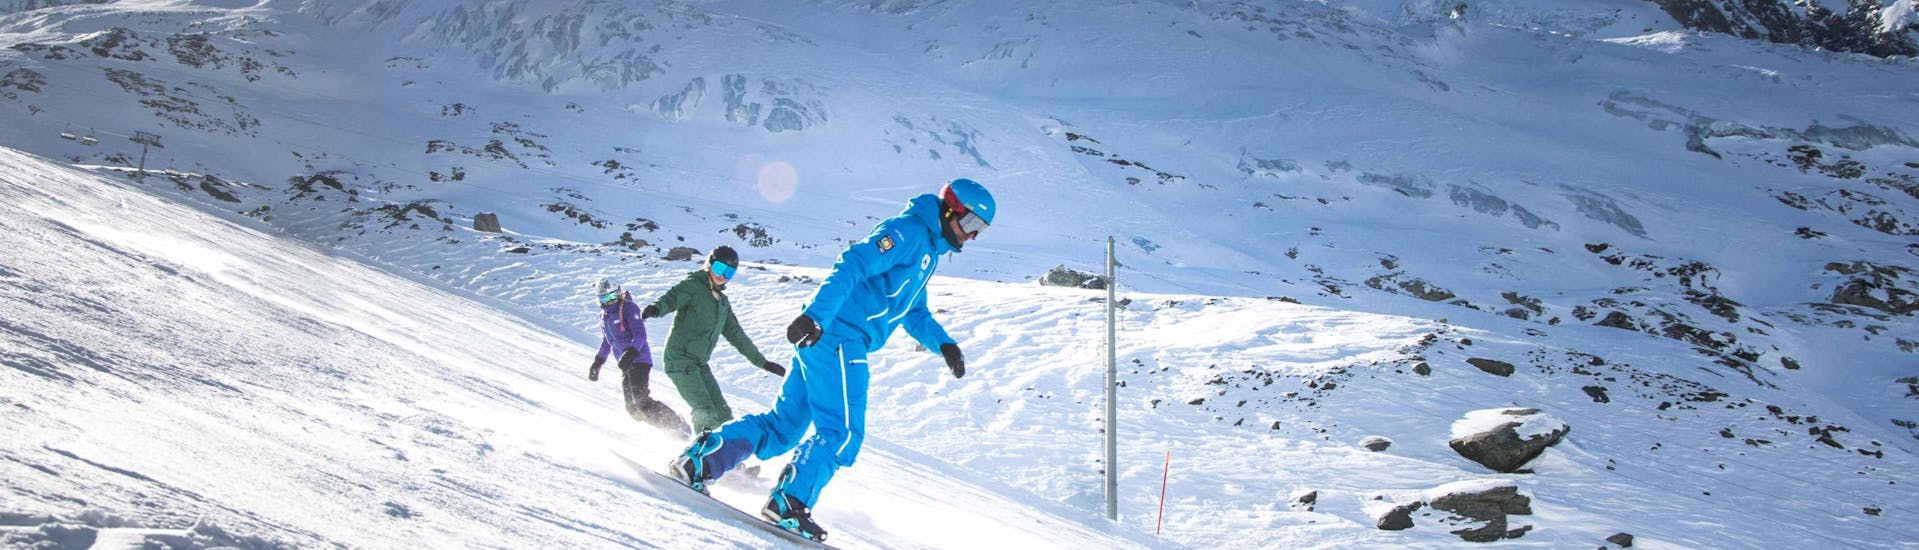 Private Snowboarding Lessons for Adults of All Levels  with Ski School ESKIMOS Saas-Fee - Hero image